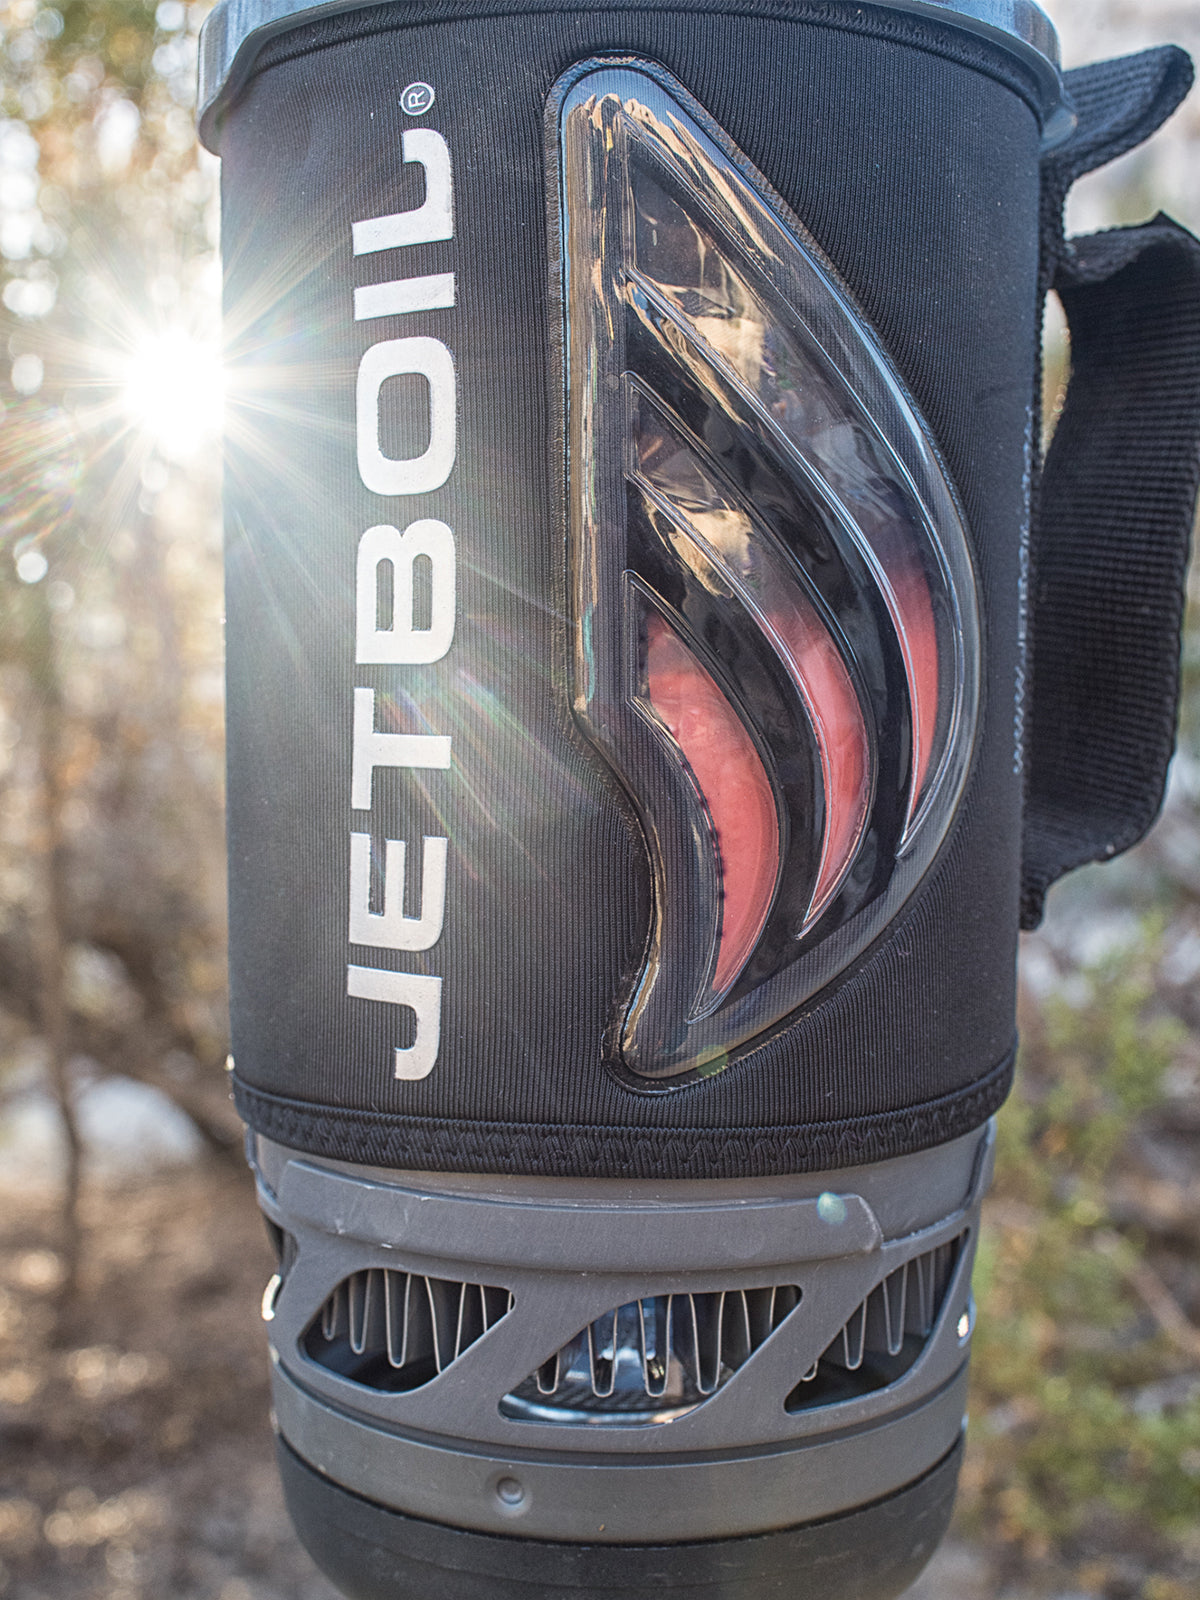 close up view of Jetboil FLASH Cooking System